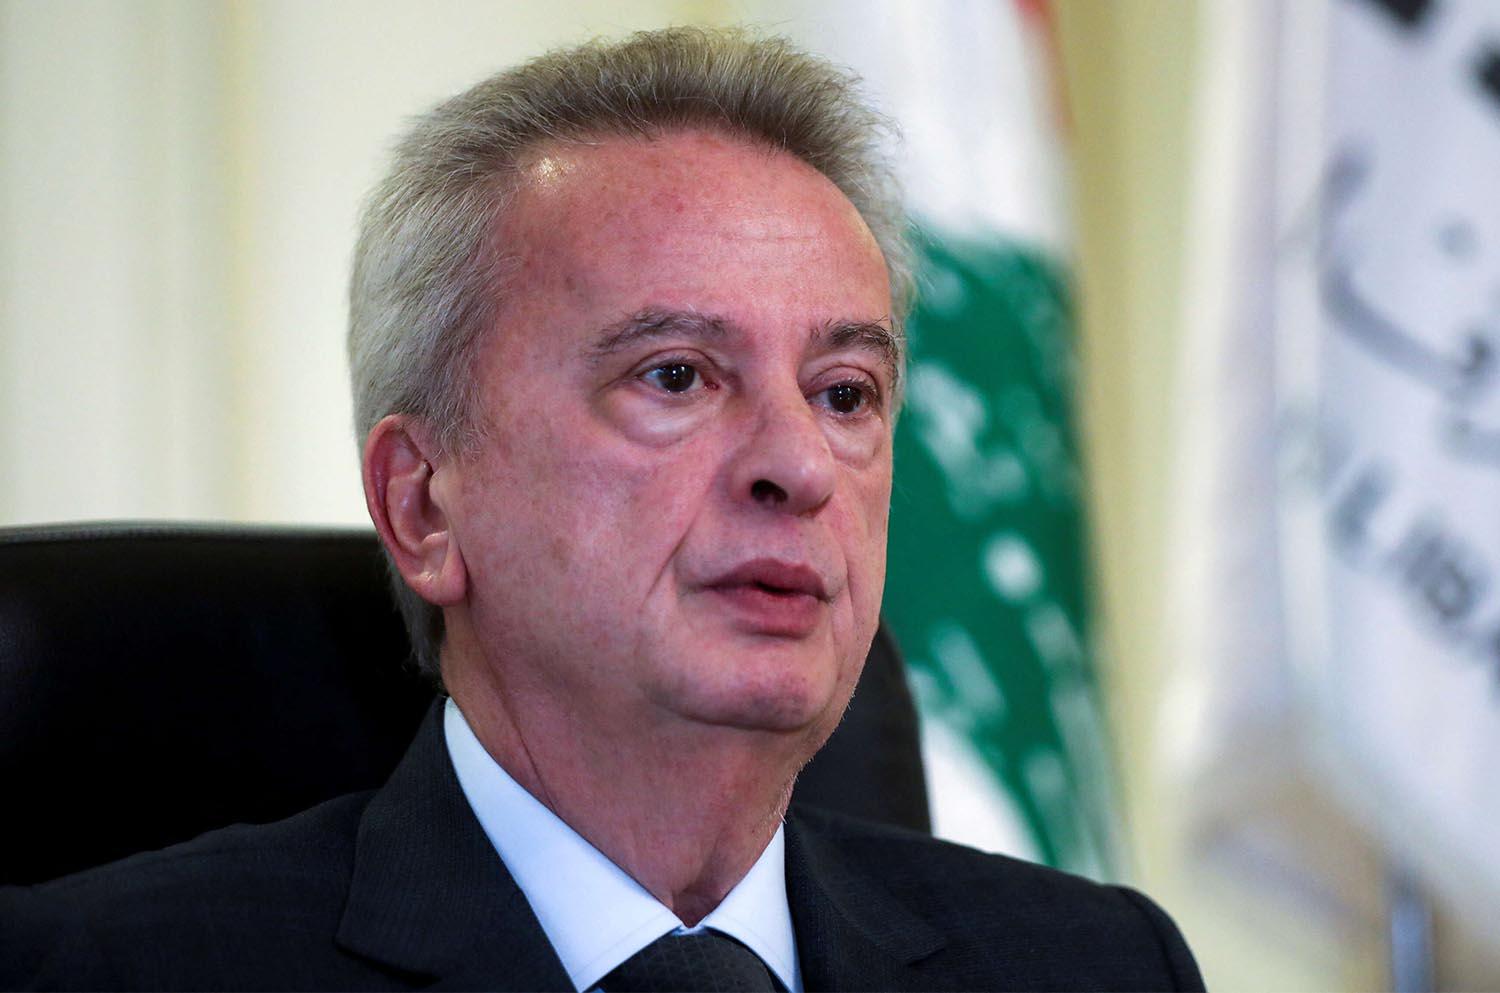 Salameh said the central bank could through monetary initiatives contain this crisis